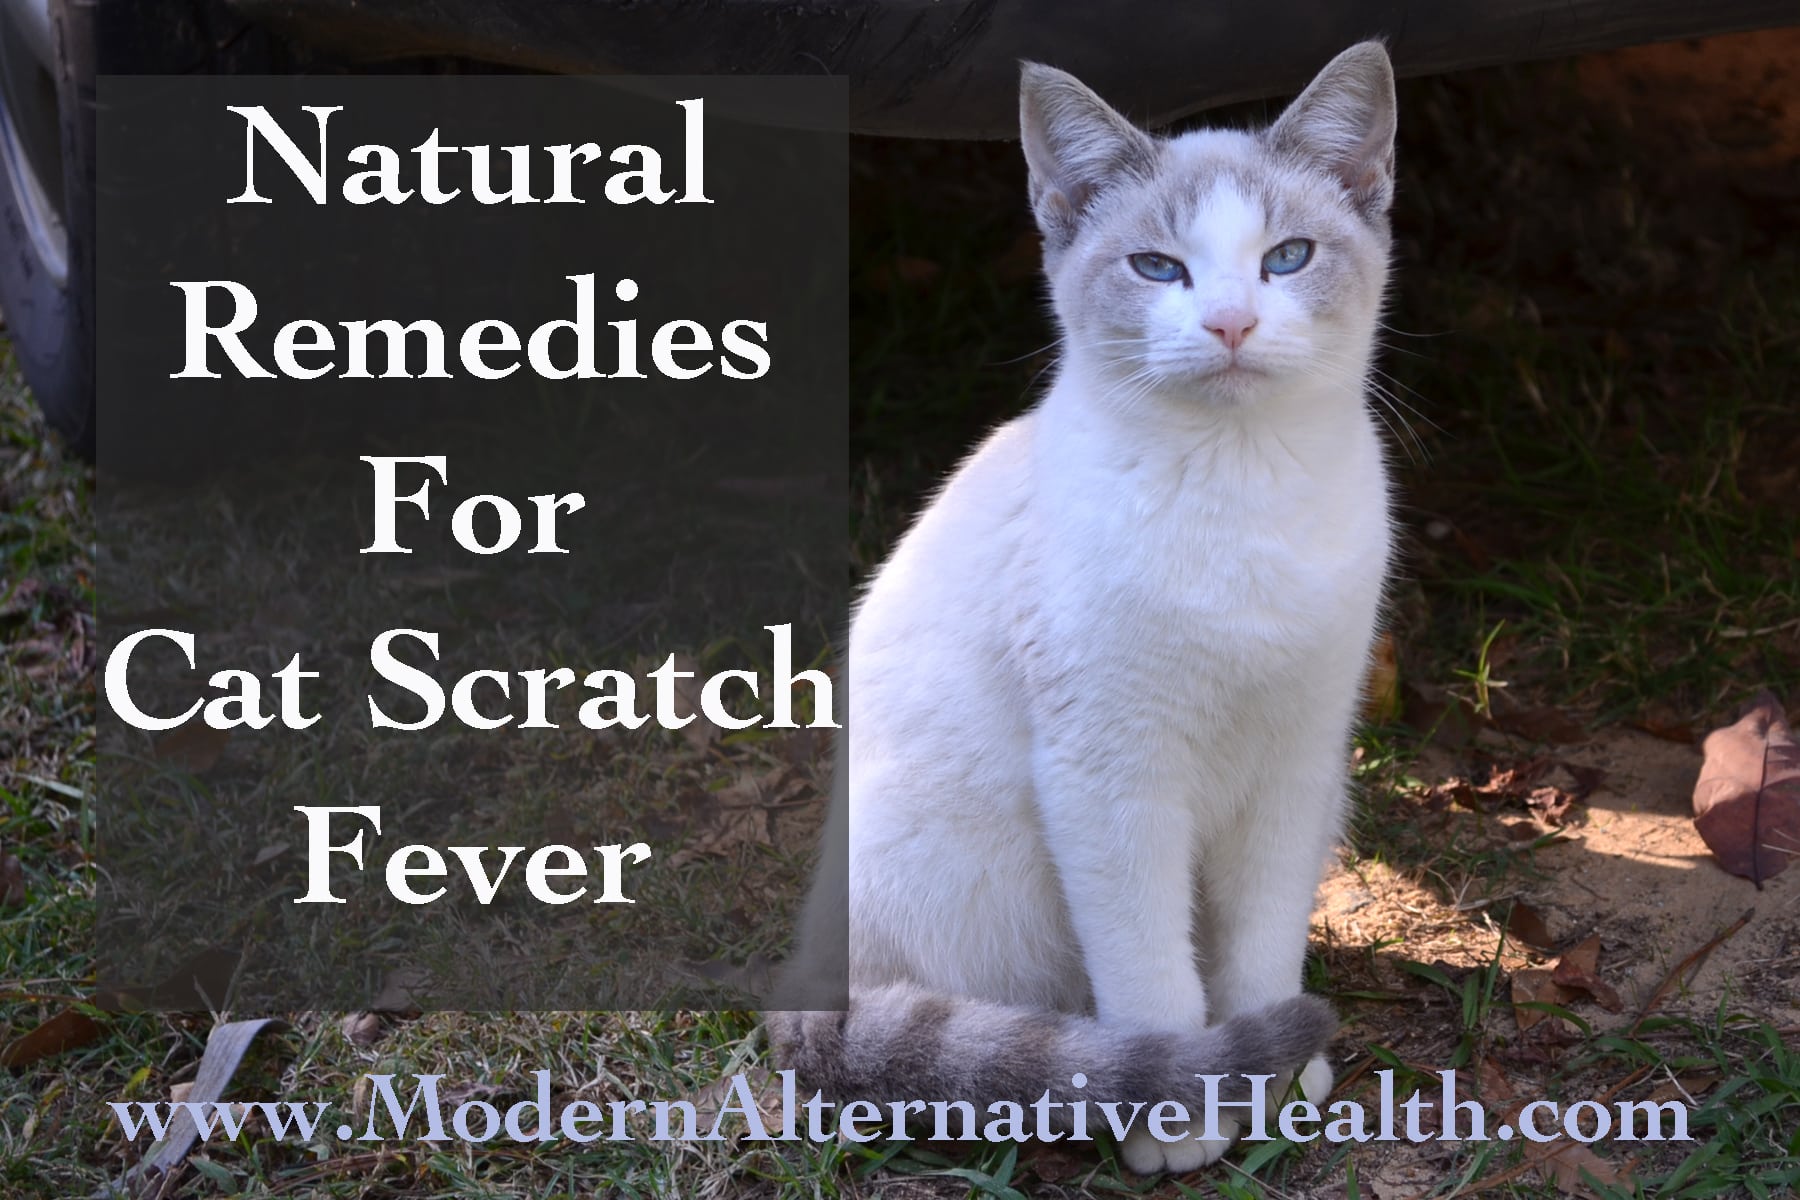 Natural Remedies For Cat Scratch Fever